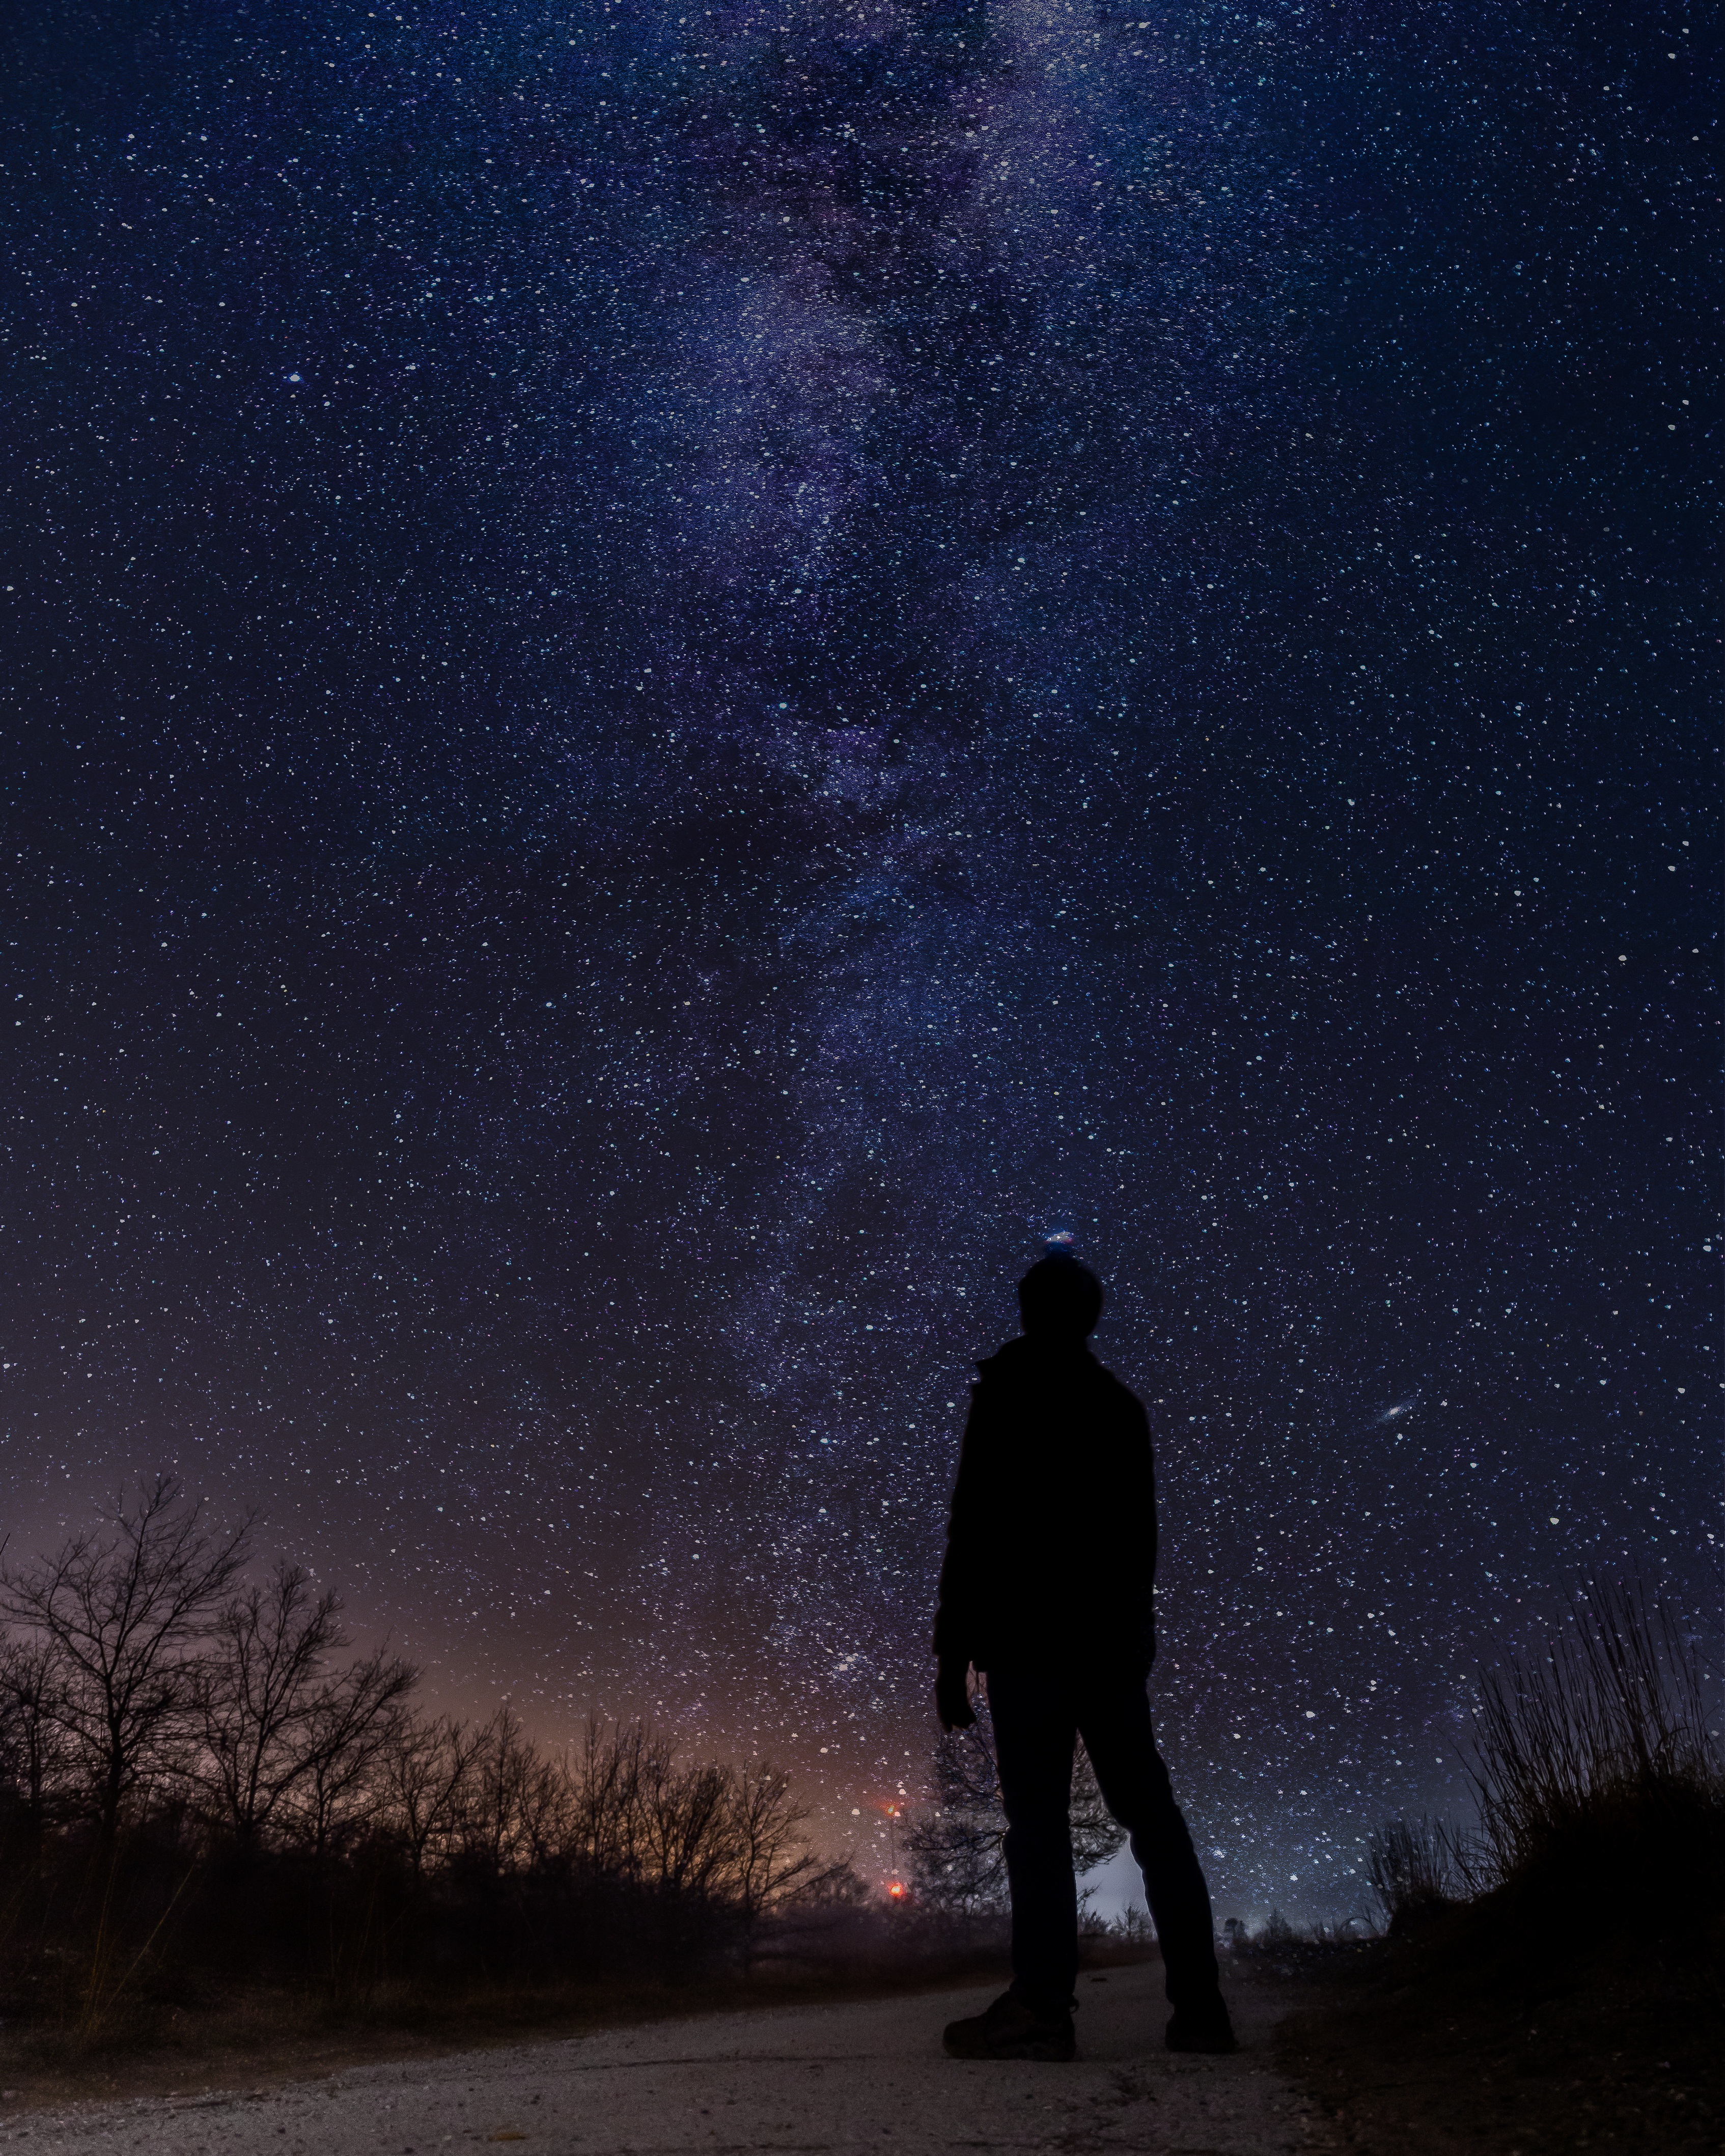 Wallpaper for mobile devices starry sky, silhouette, night, observation